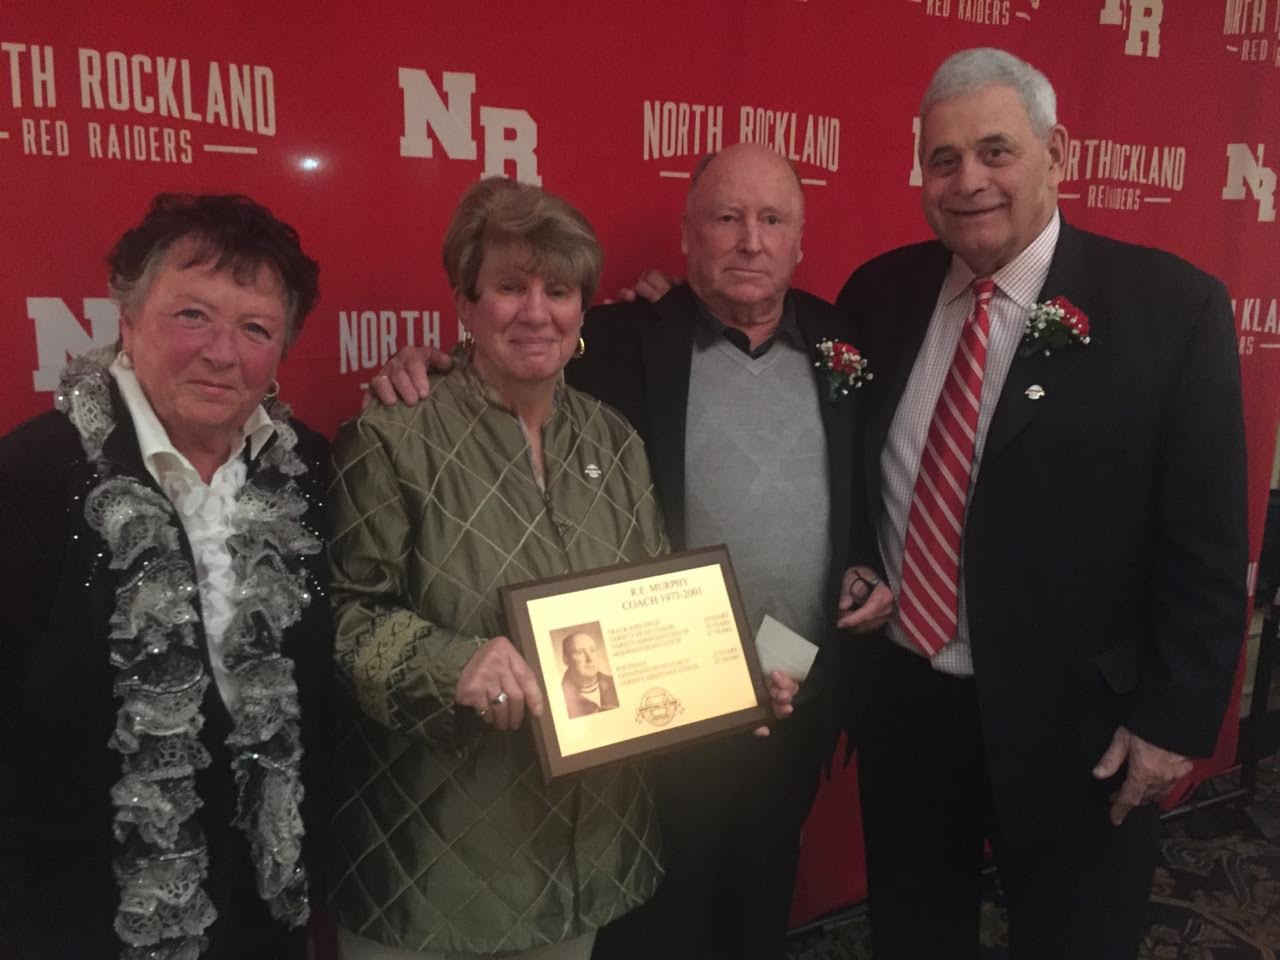 NEW SLATE INDUCTED INTO NORTH ROCKLAND HALL OF FAME [FEBRUARY]